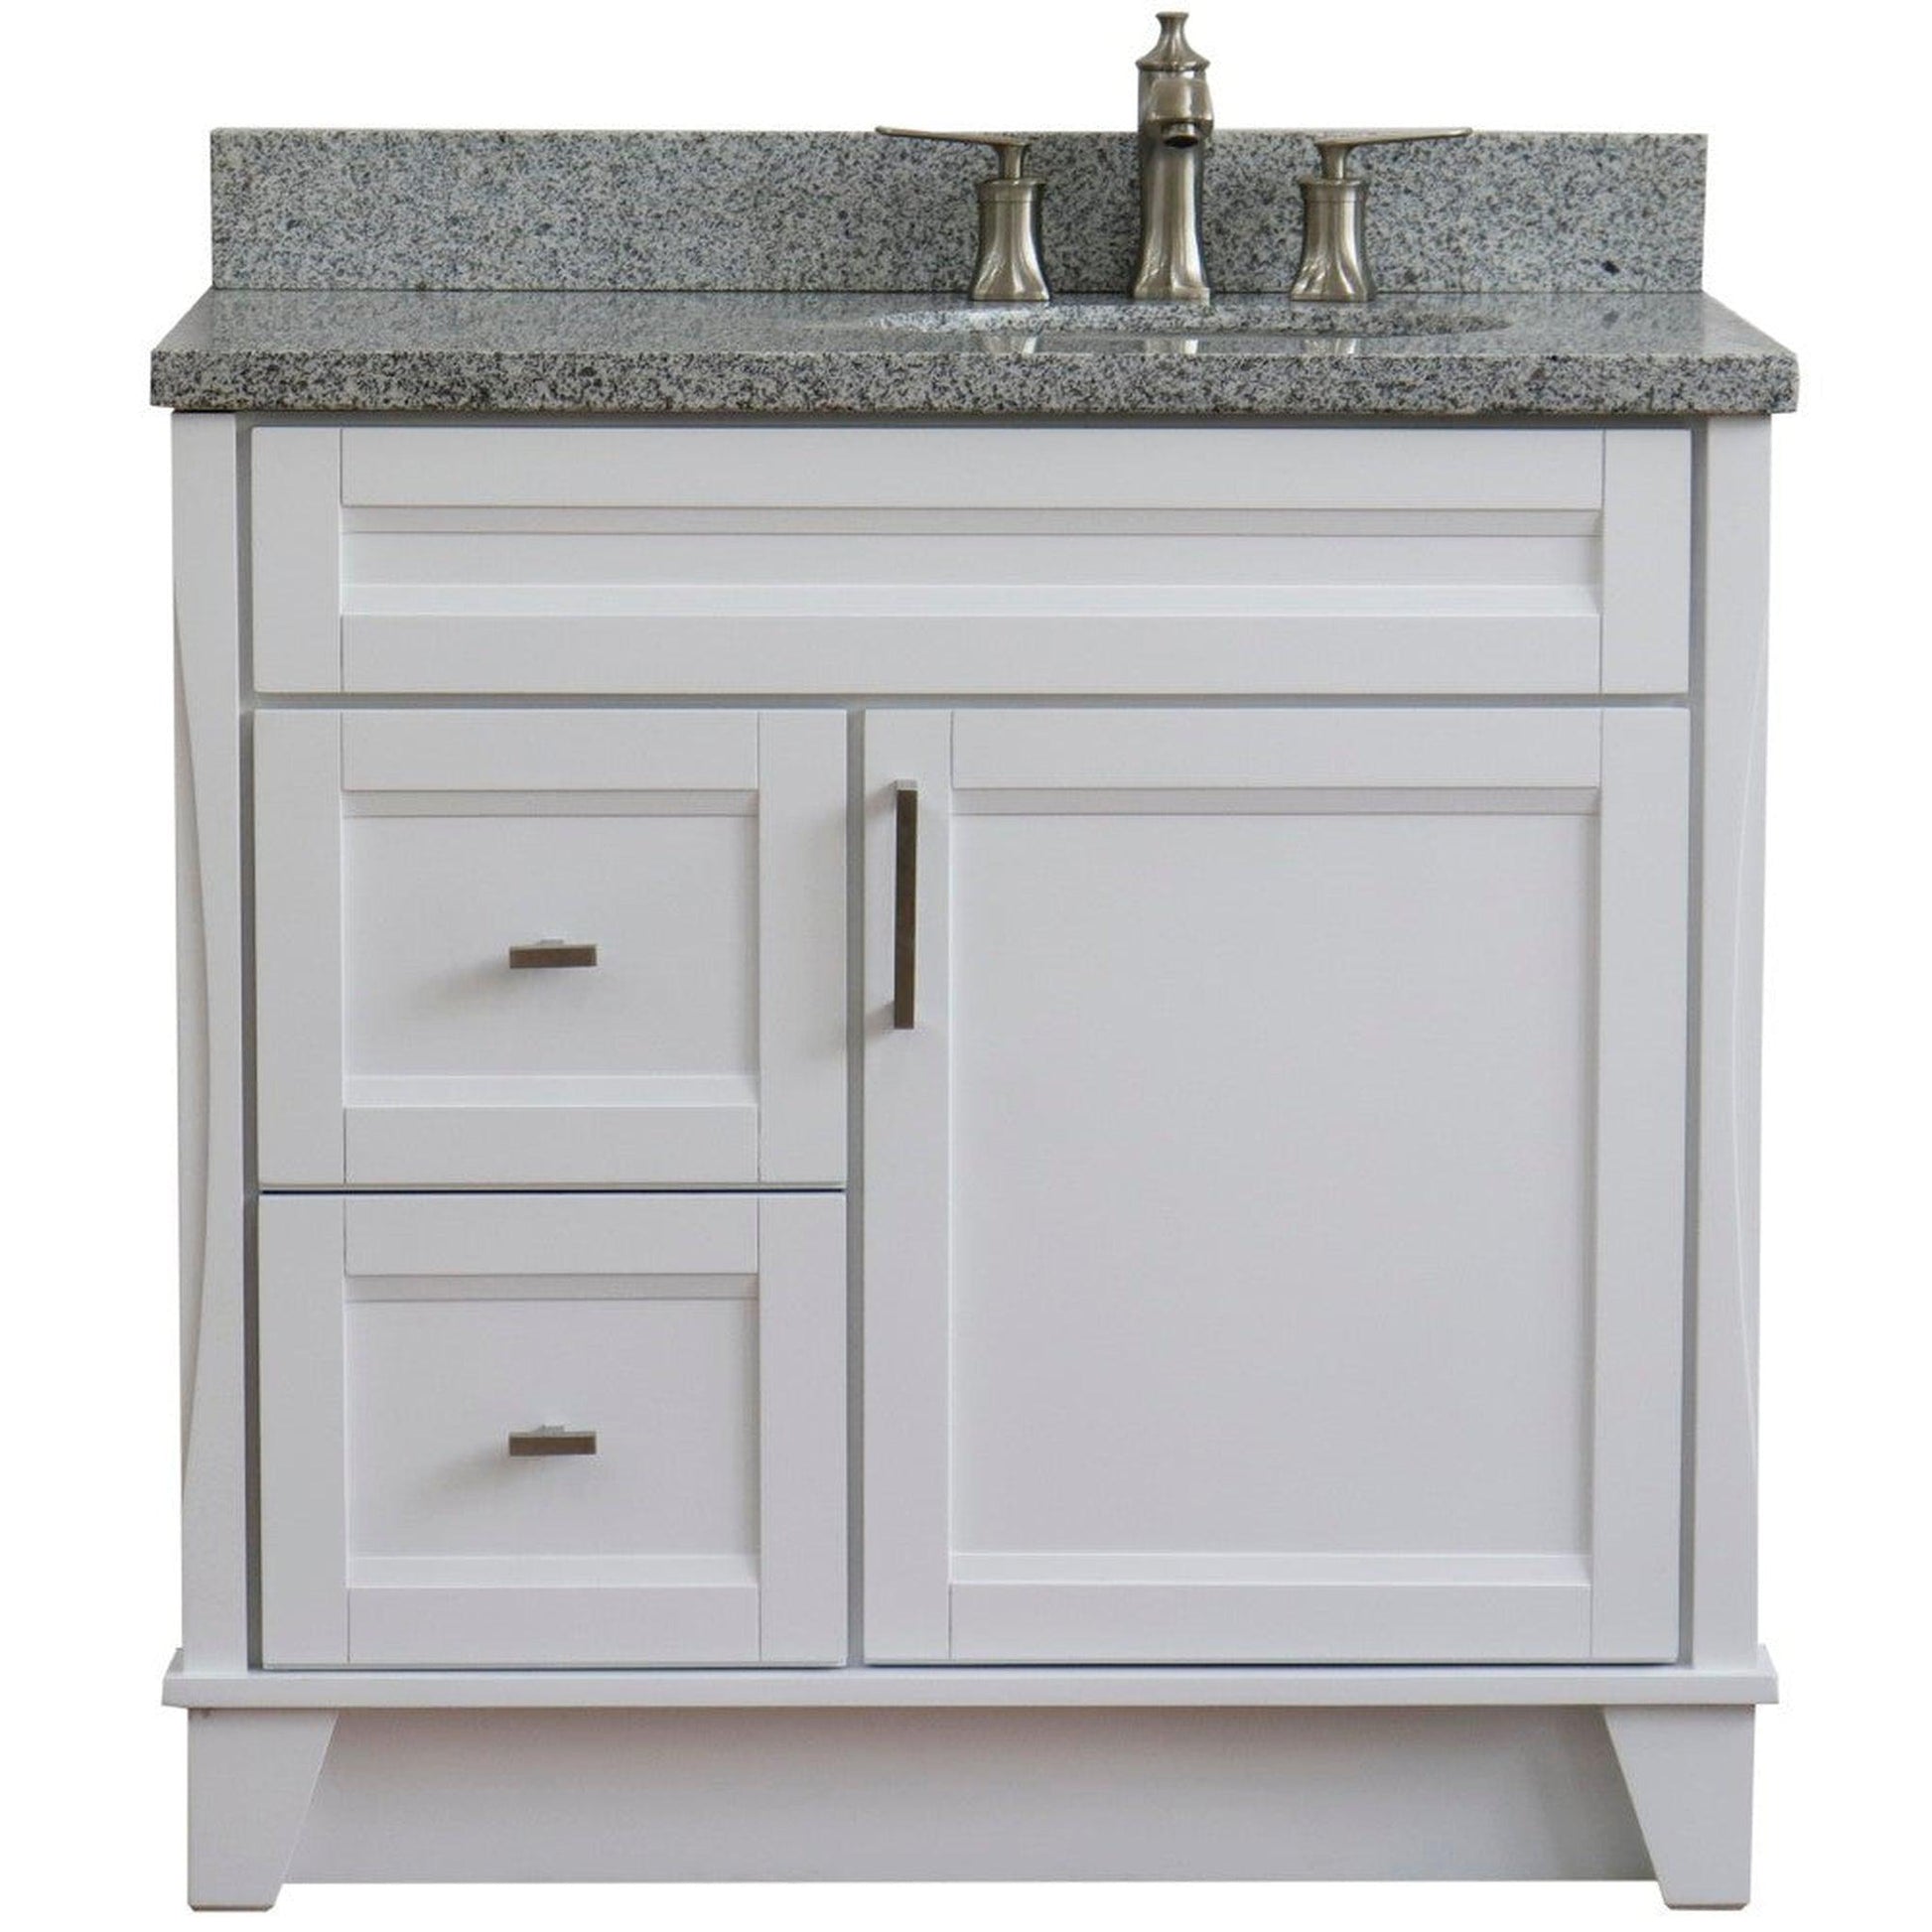 Bellaterra Home Terni 37" 1-Door 2-Drawer White Freestanding Vanity Set With Ceramic Right Offset Undermount Oval Sink and Gray Granite Top, and Right Door Base